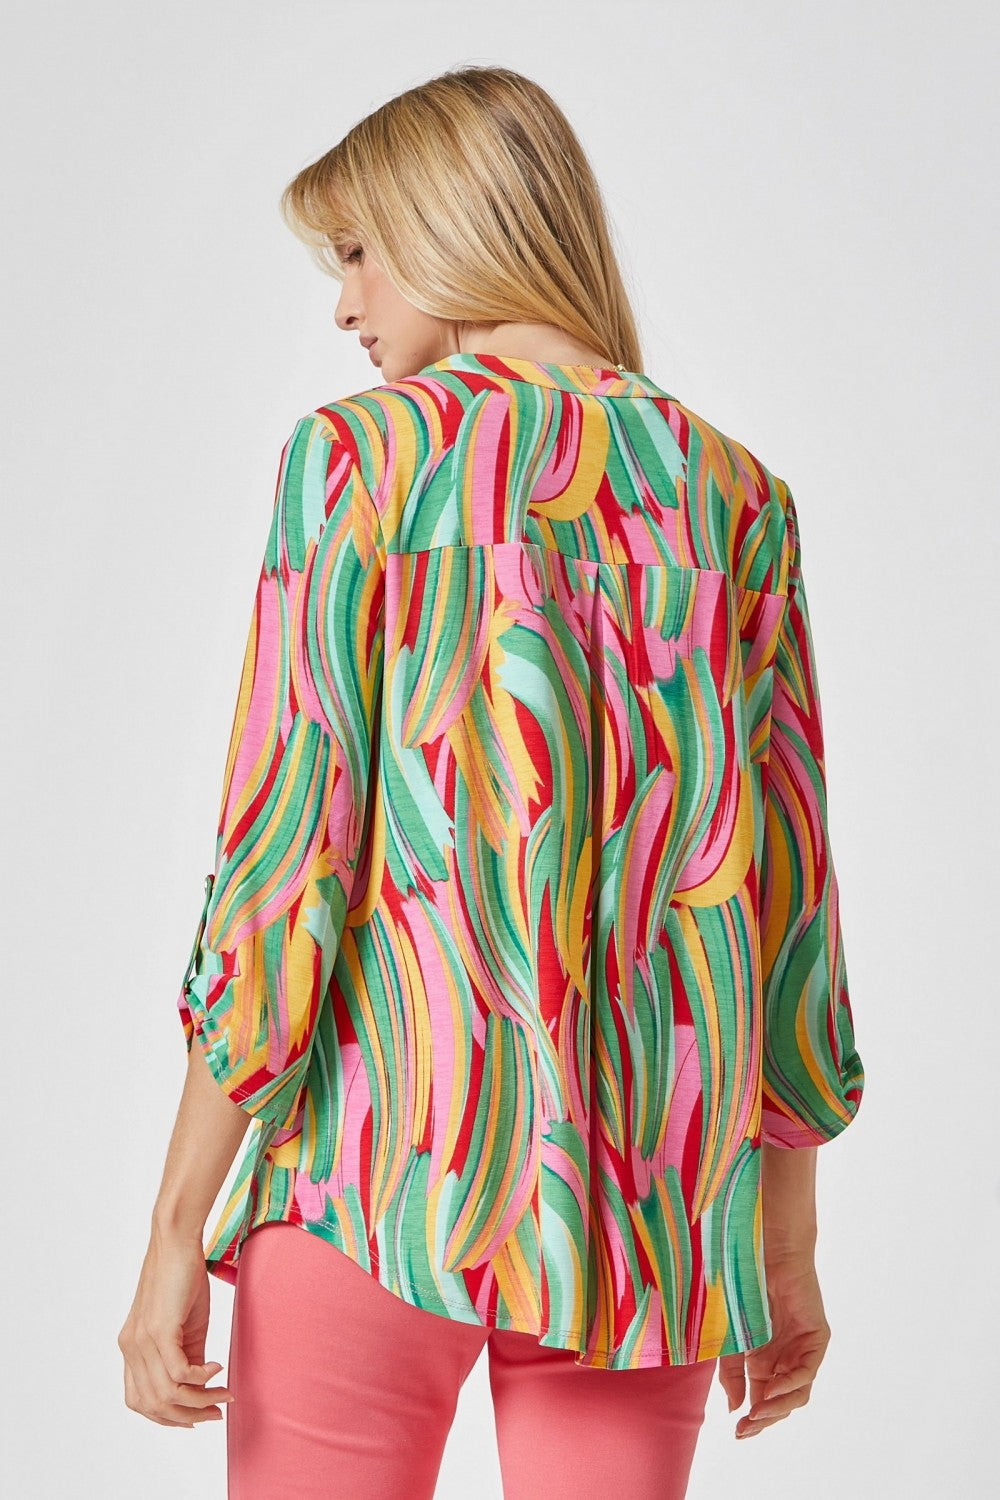 Vertical Splash Colorful Lizzy Top